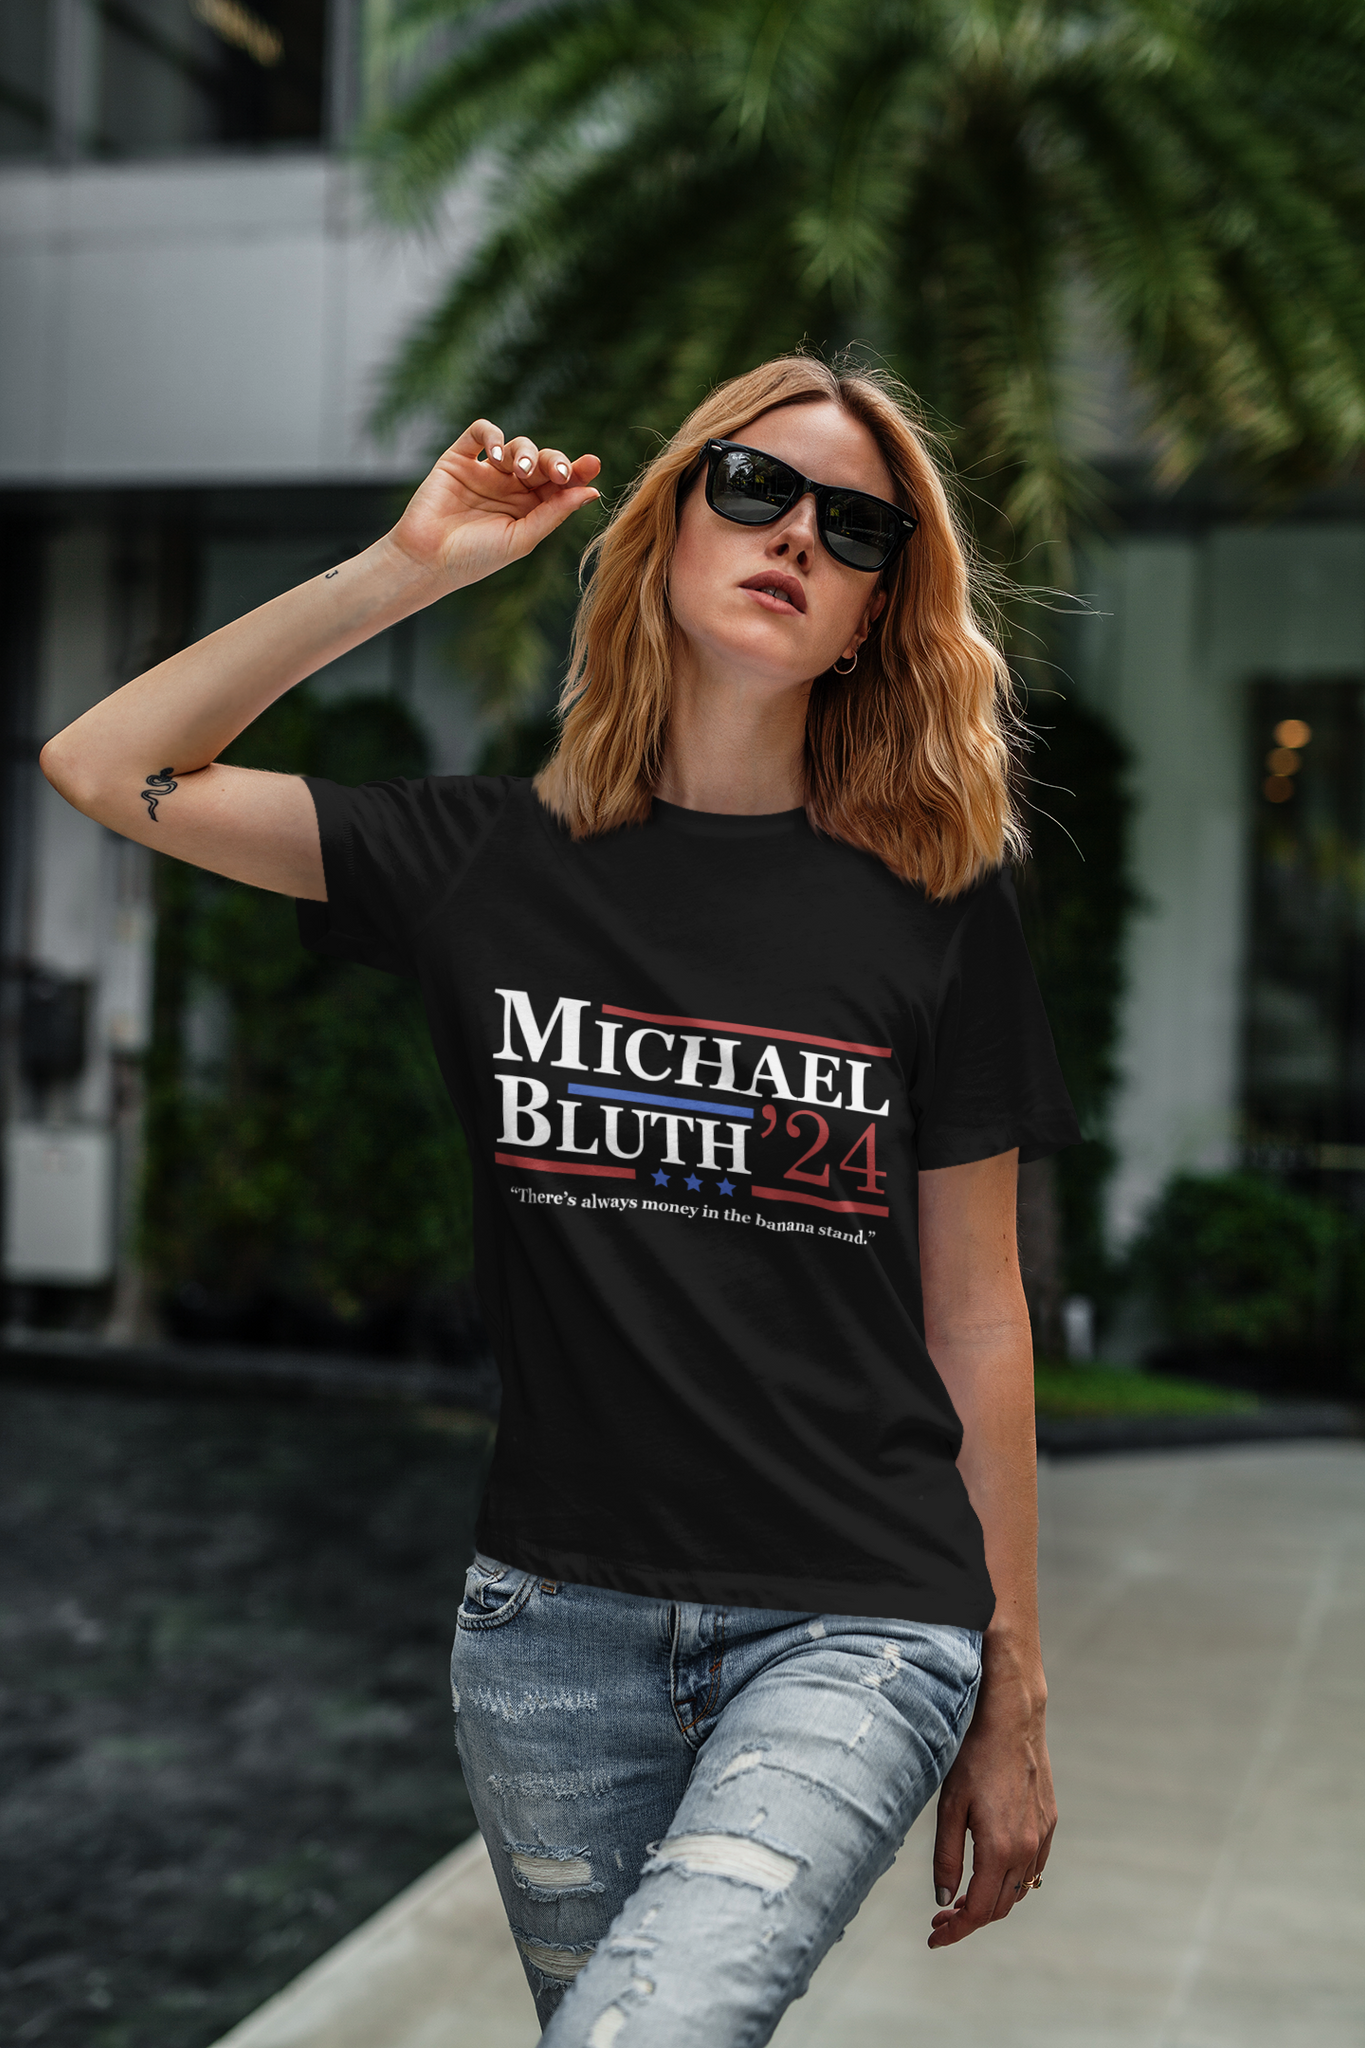 Arrested Development T Shirt, Michael Bluth 24 For President T Shirt, Theres Always Money In The Banana Stand Shirt